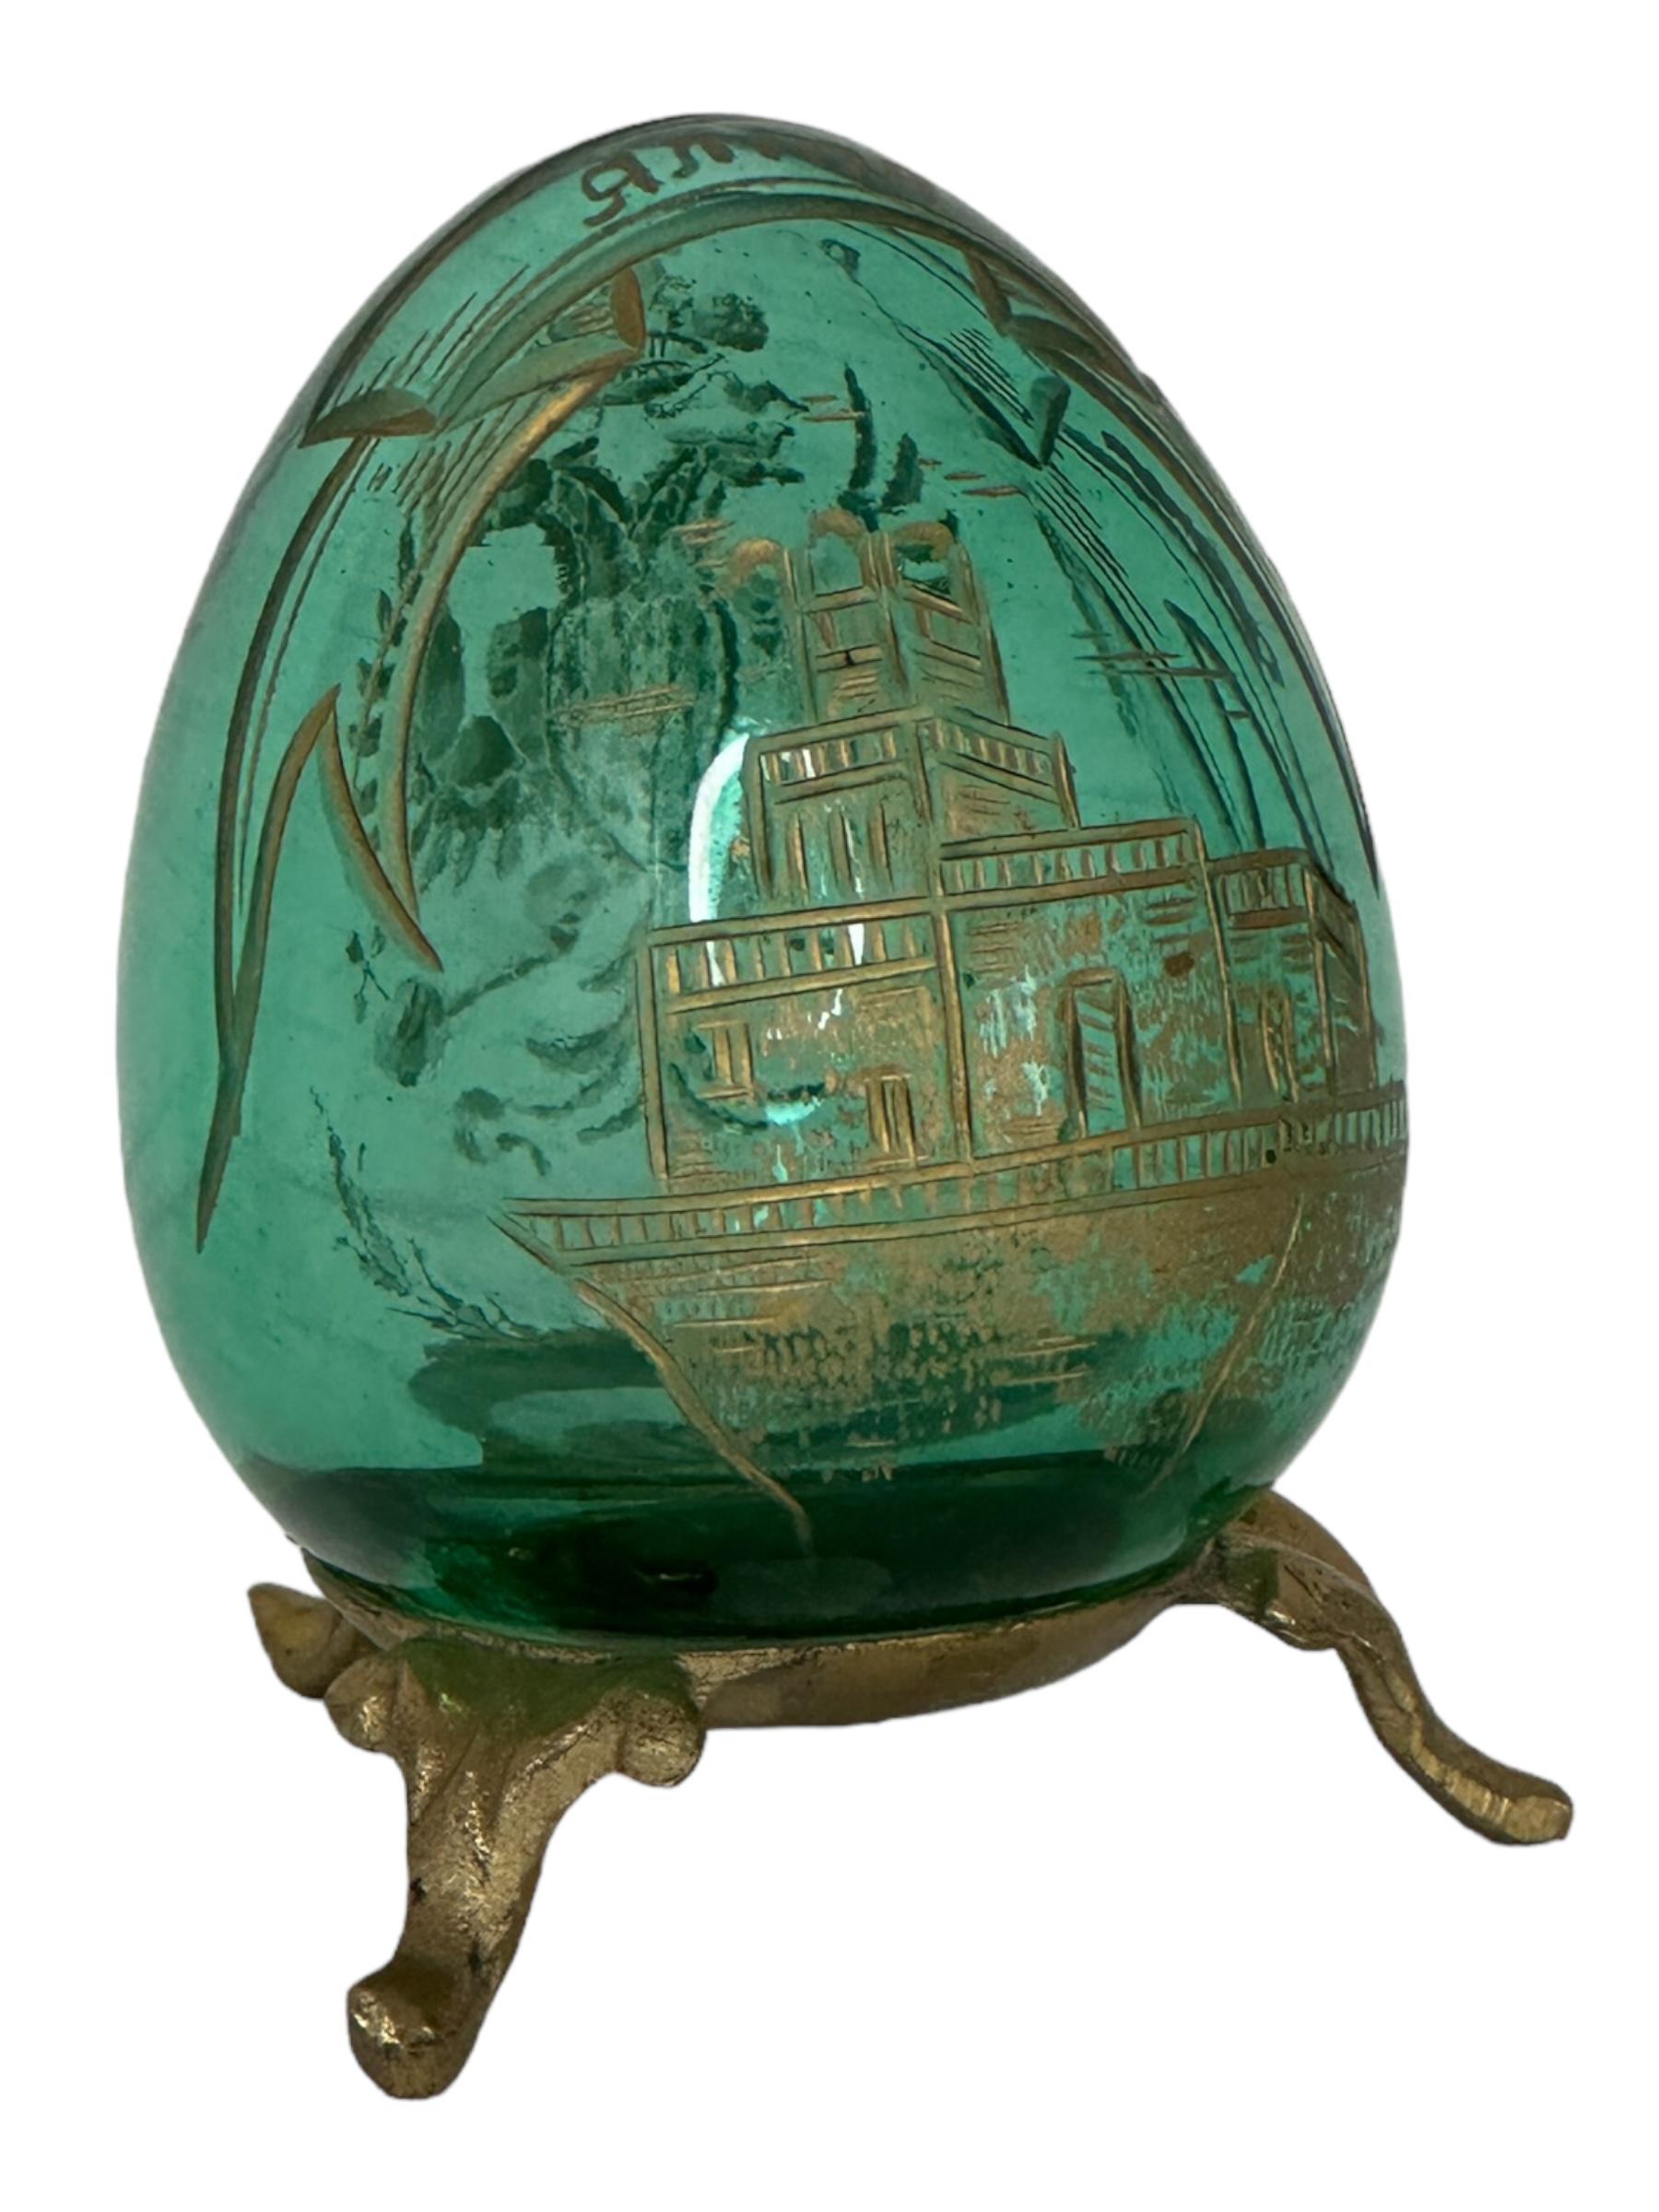 Vintage Faberge Russia Style Green Glass Egg with Etched Decorations 1